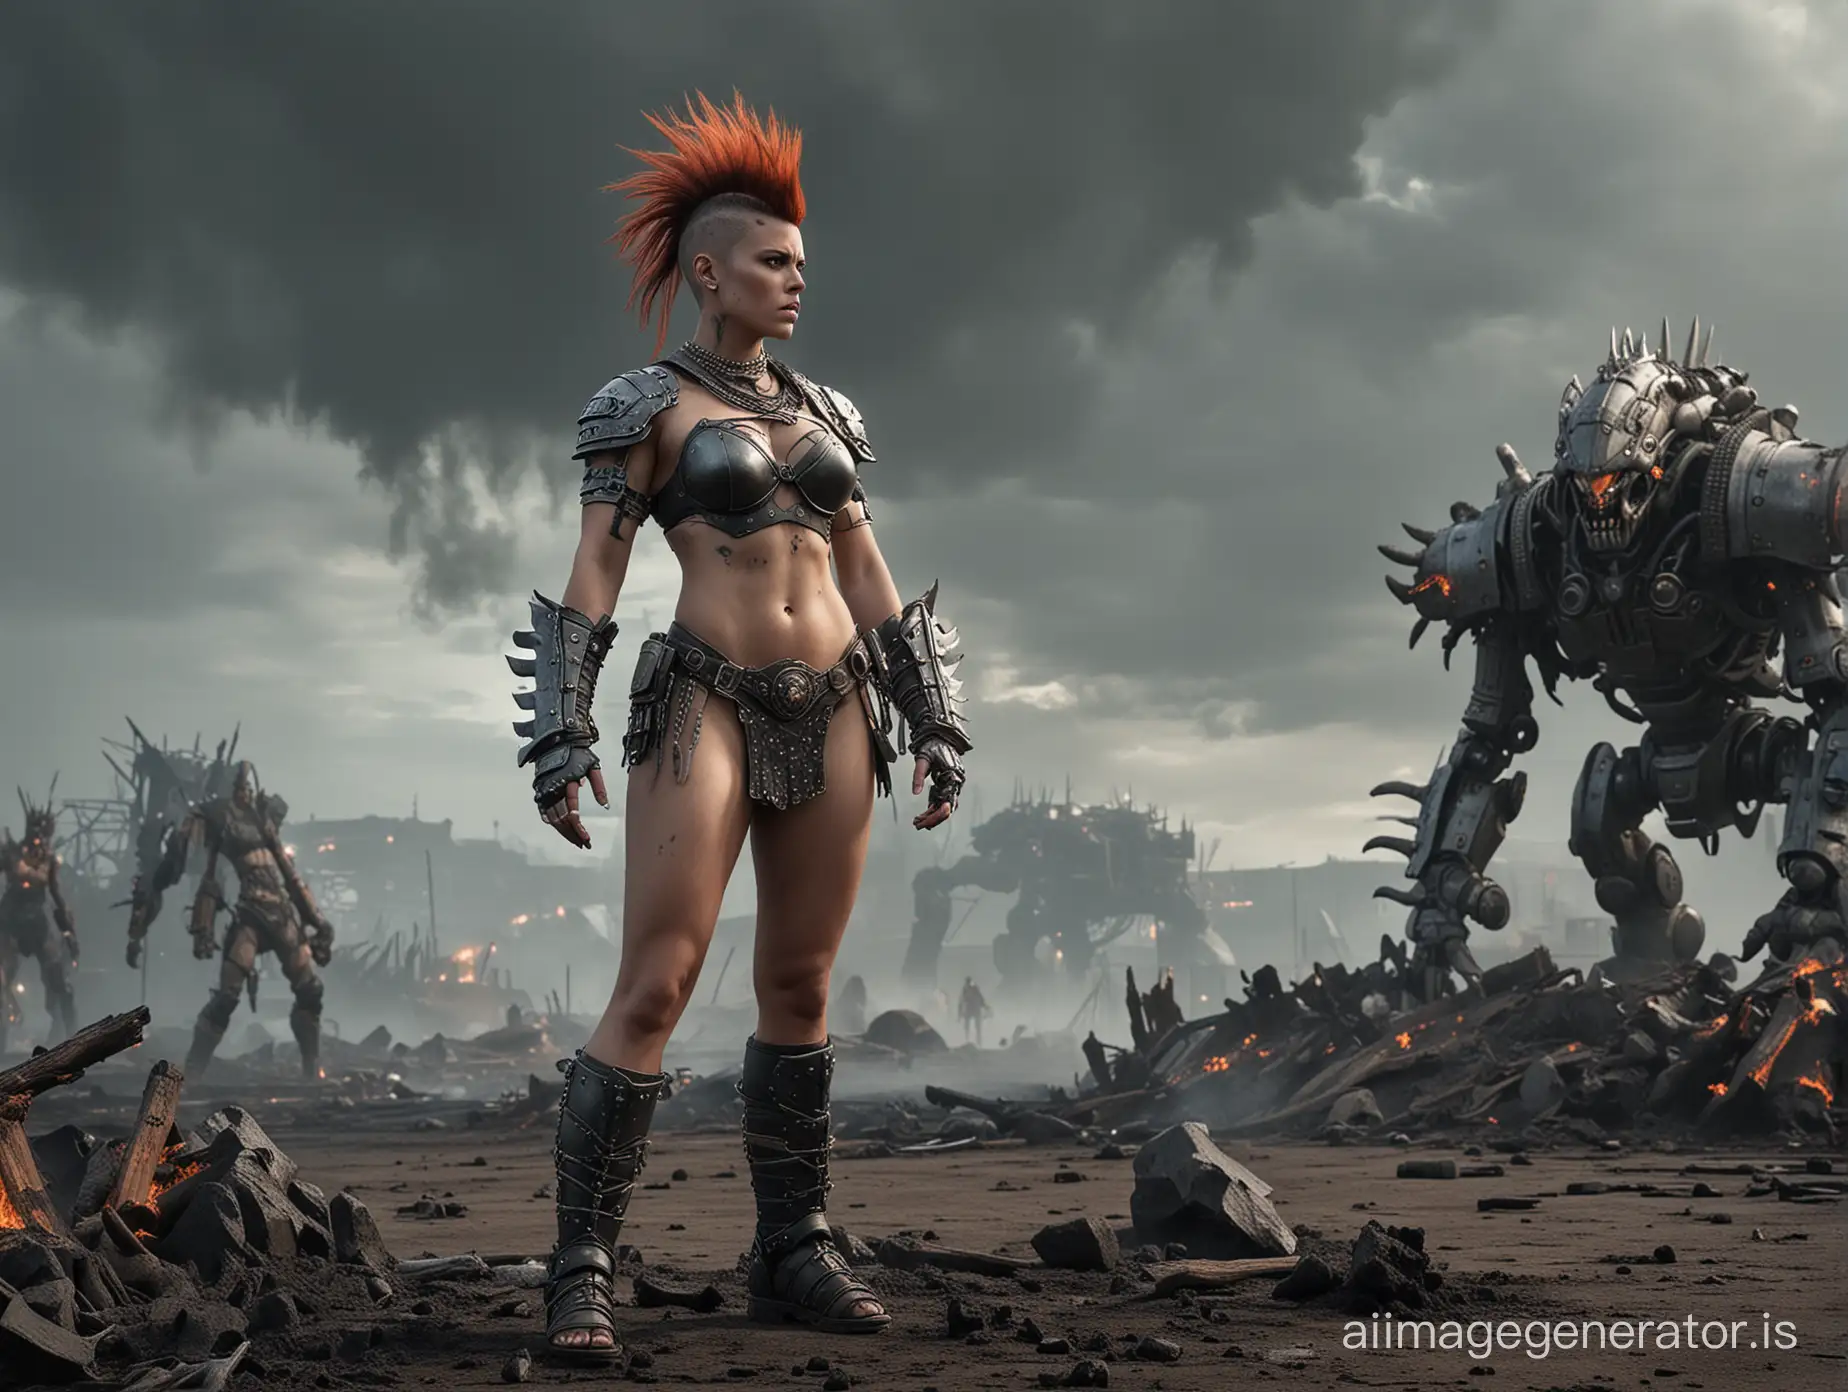 Photograph of a barbarian girl with mohawk standing on a dark and gloomy battlefield. Scantily clad in skimpy armor. Slayed foes around the battle field. Huge robotic animalistic monstrosity in the background. Lots of smoke and fire. Foggy, overcast, some rays through the clouds.

Realistic photograph. Natural lighting. Ultra realistic. Realism. 80mm lens.